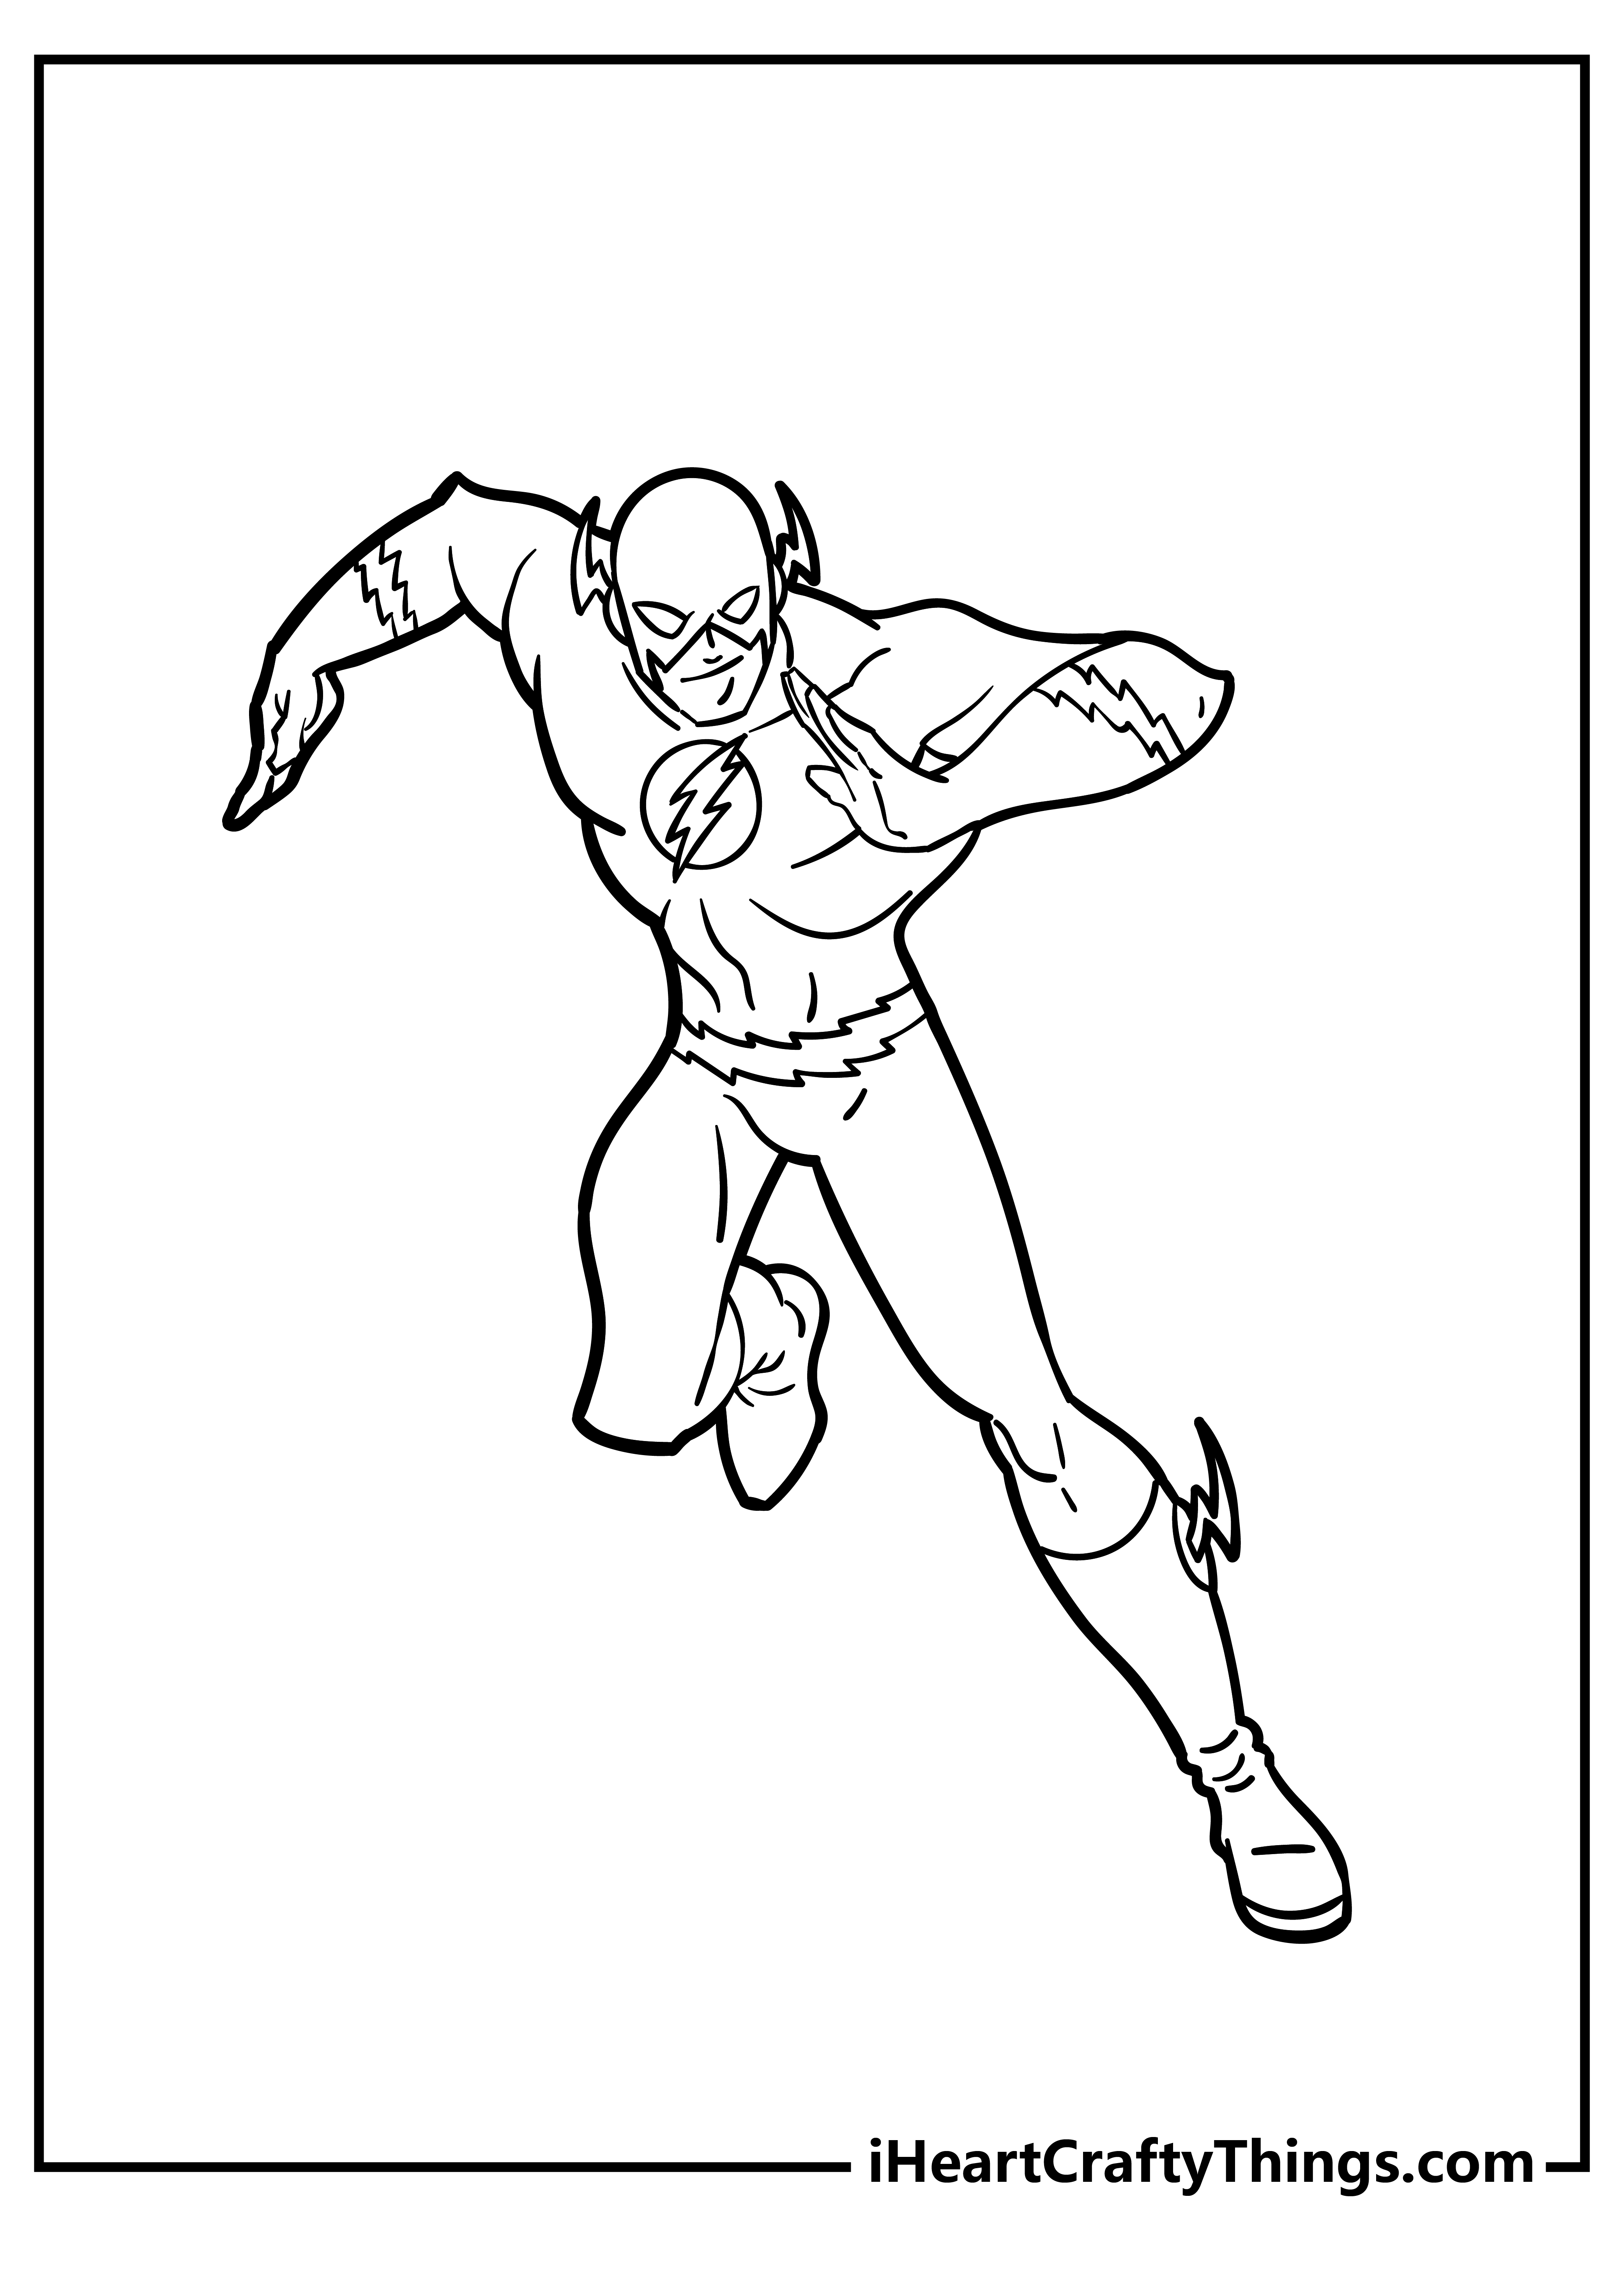 Printable Superhero Coloring Pages Updated 20